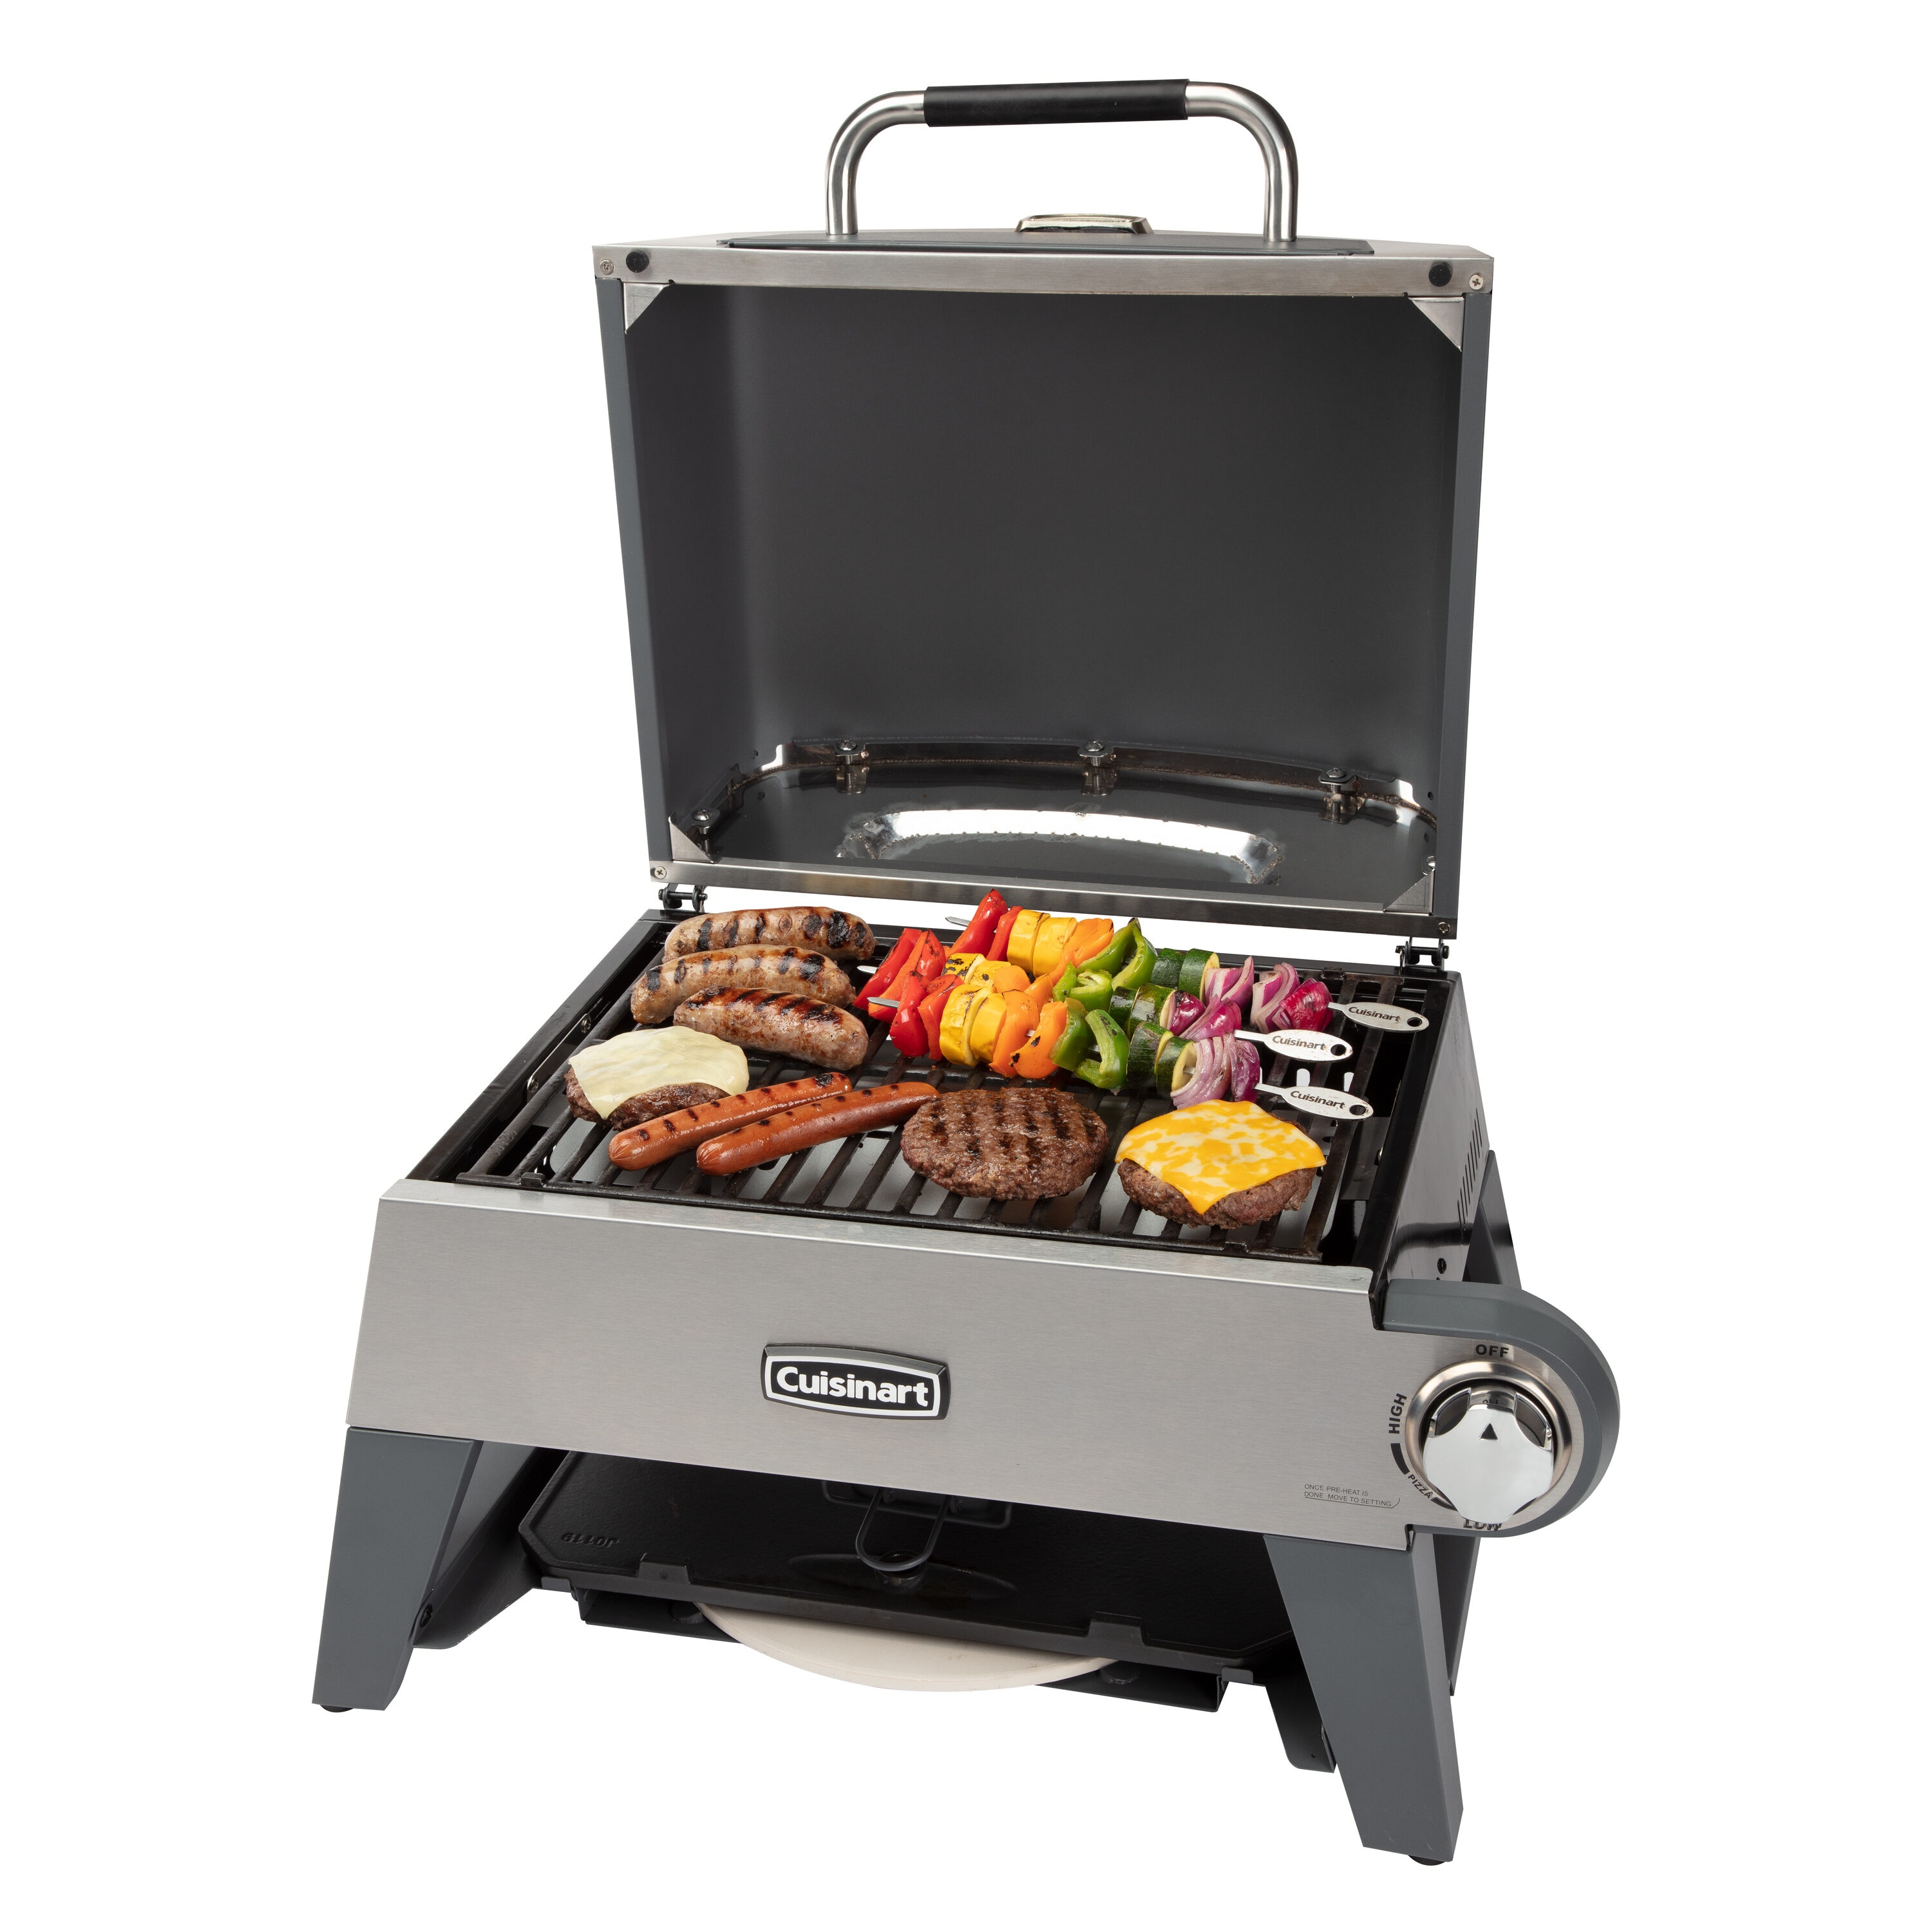  Cuisinart CEG-115 2-in-1 Outdoor Electric Grill, 240 sq. inch  Cooking Space : Patio, Lawn & Garden